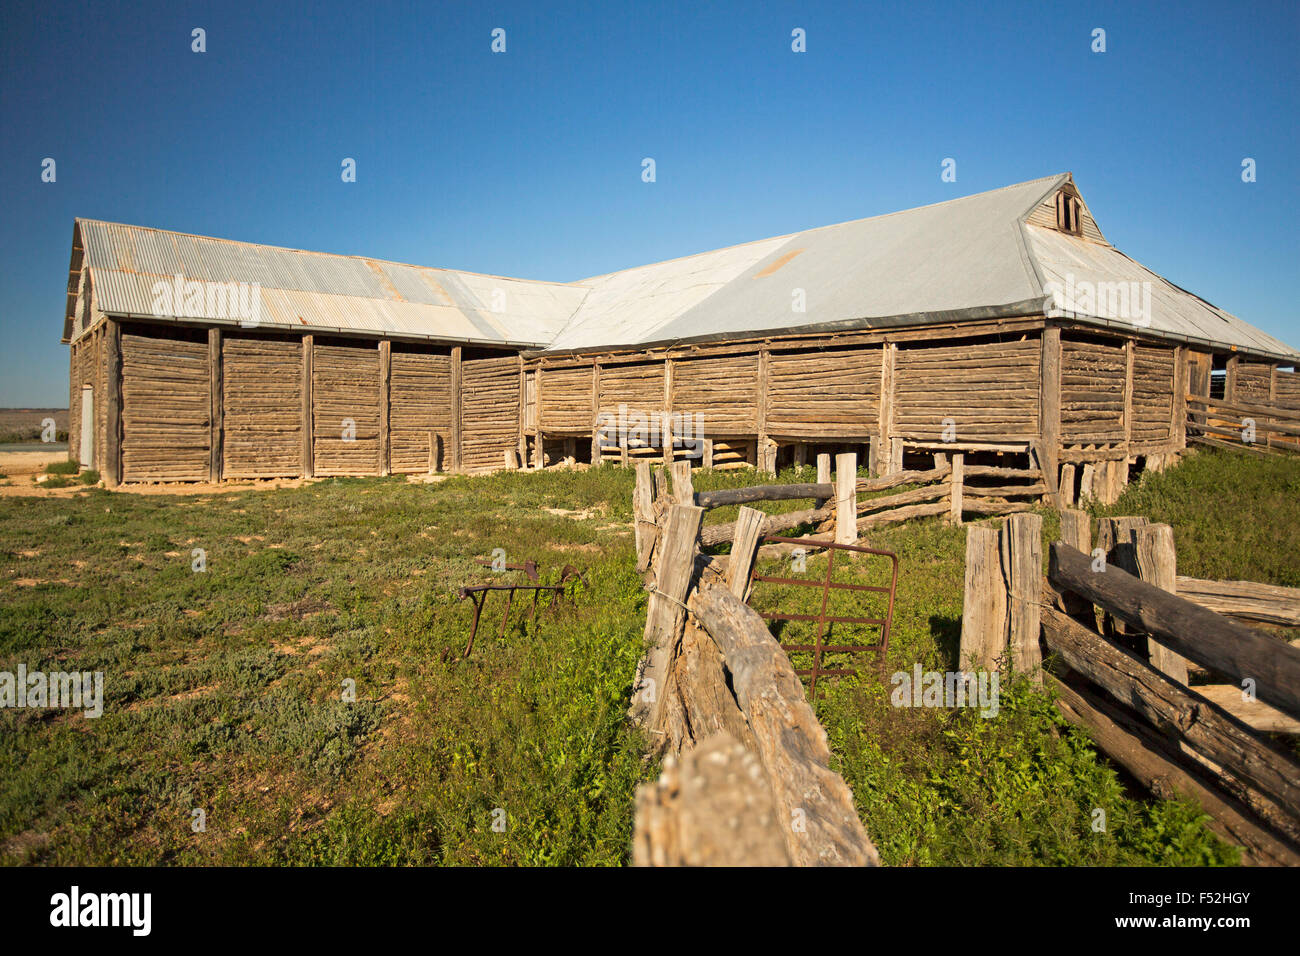 Extensive old timber shearing shed & yards, built from native cyress pine, under blue sky at Mungo National Park outback NSW Stock Photo